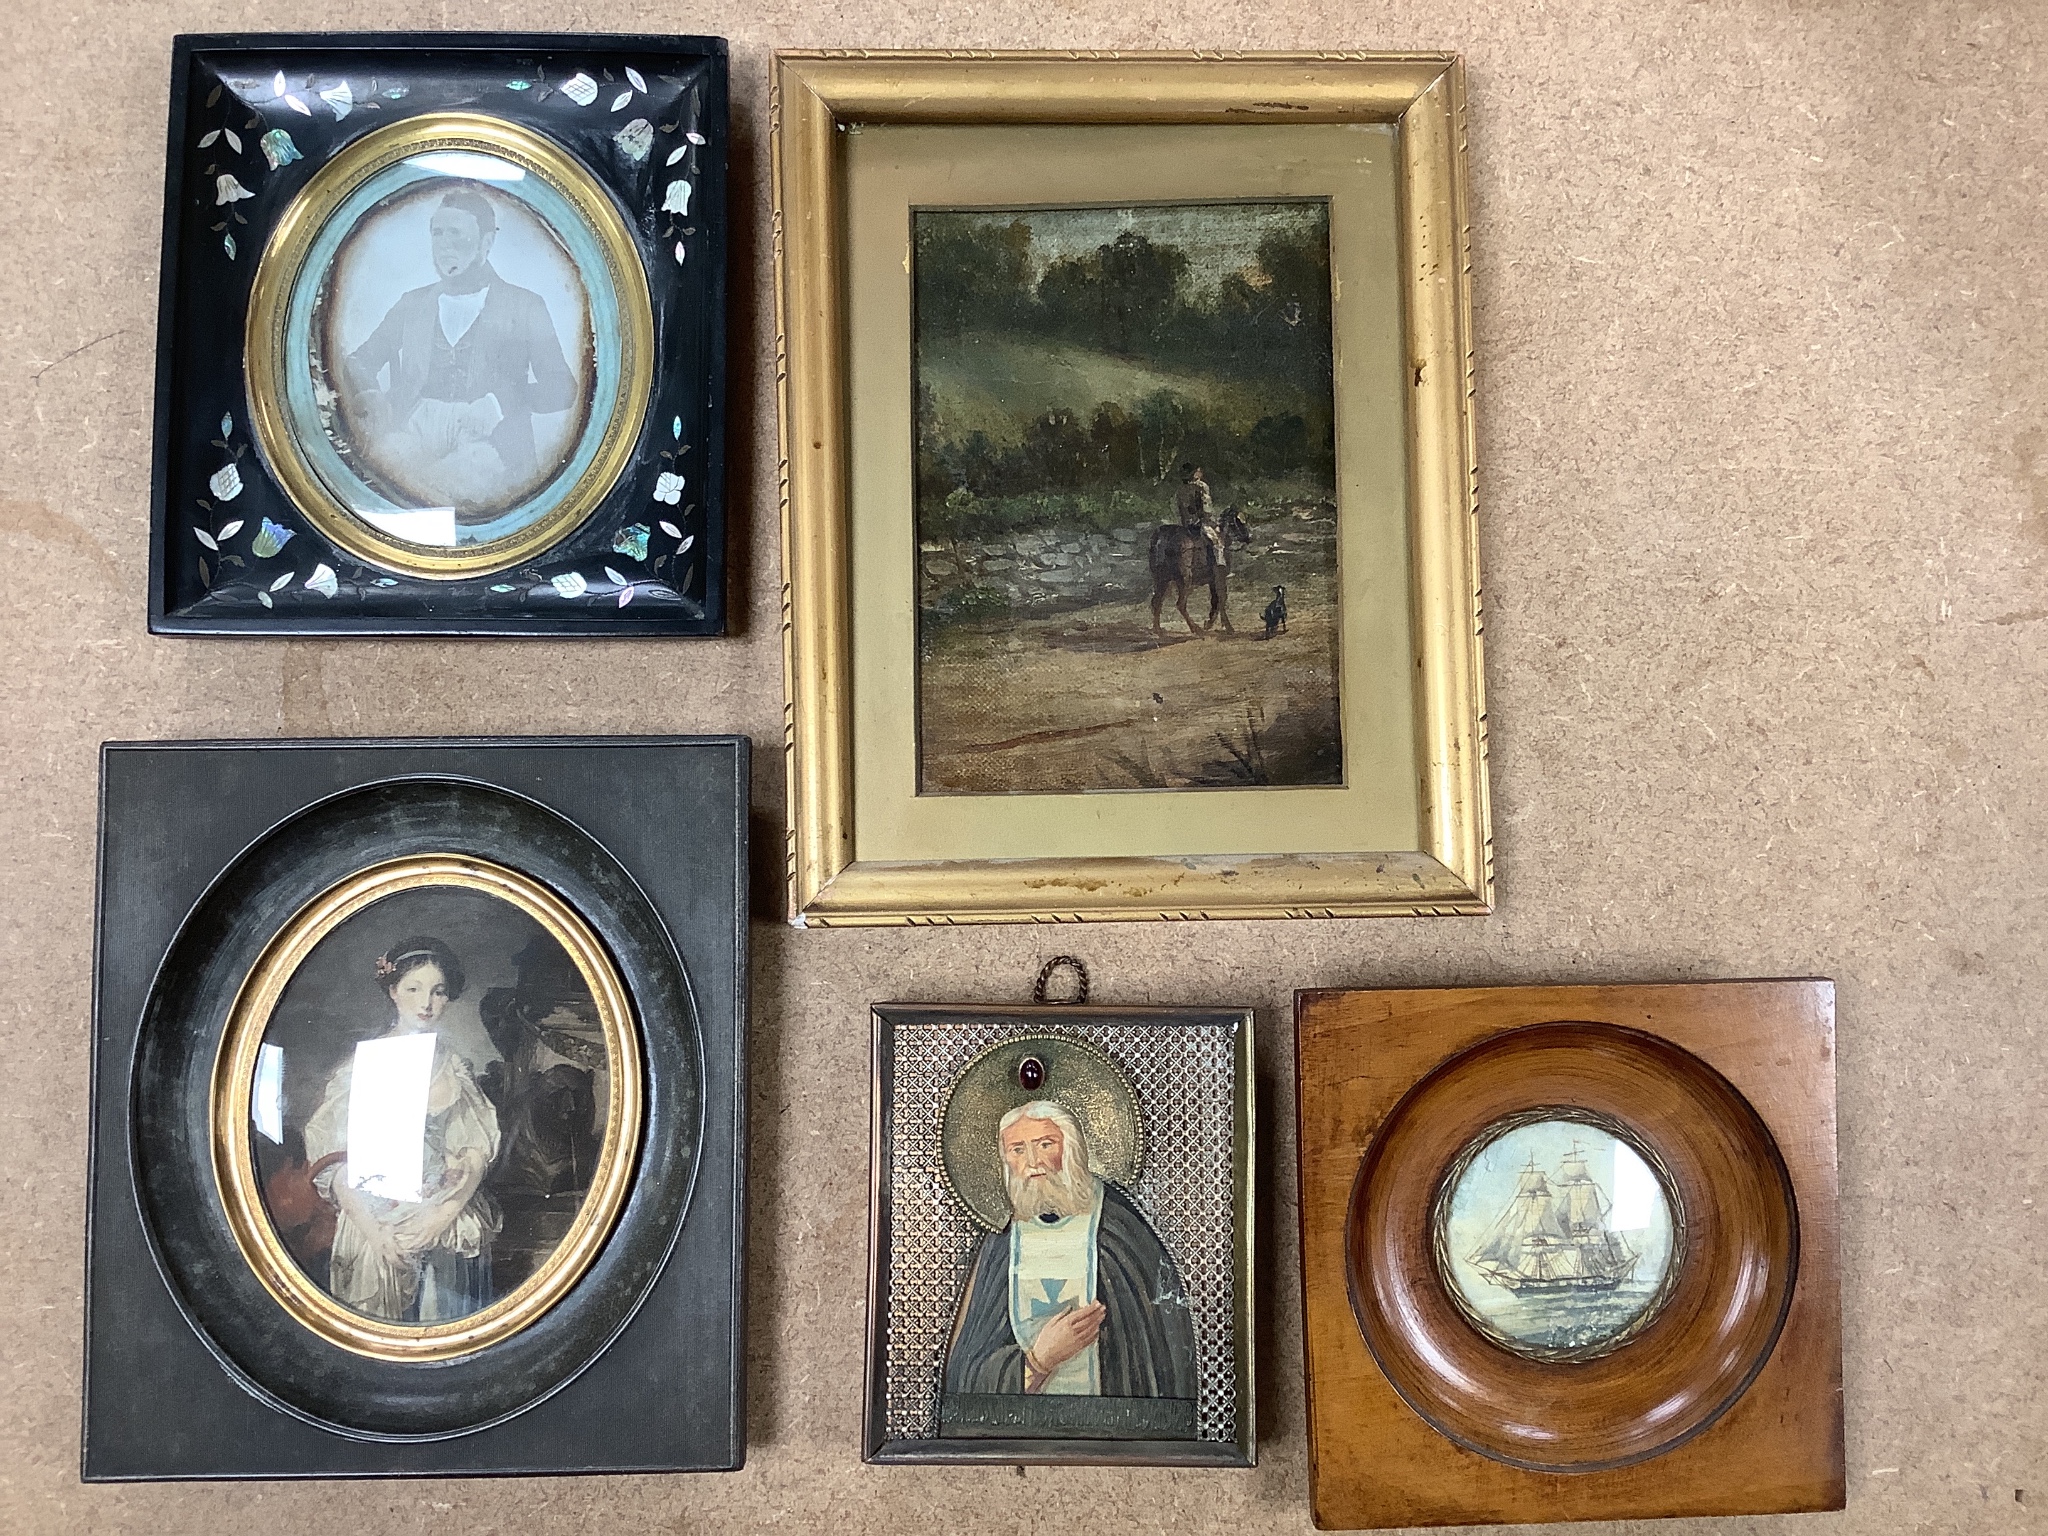 A 19th century Daguerreotype portrait of a gentleman, together with a small Russian painted icon, a small miniature watercolour study of a French galleon, a small oil study on canvas, horse and rider along a country lane